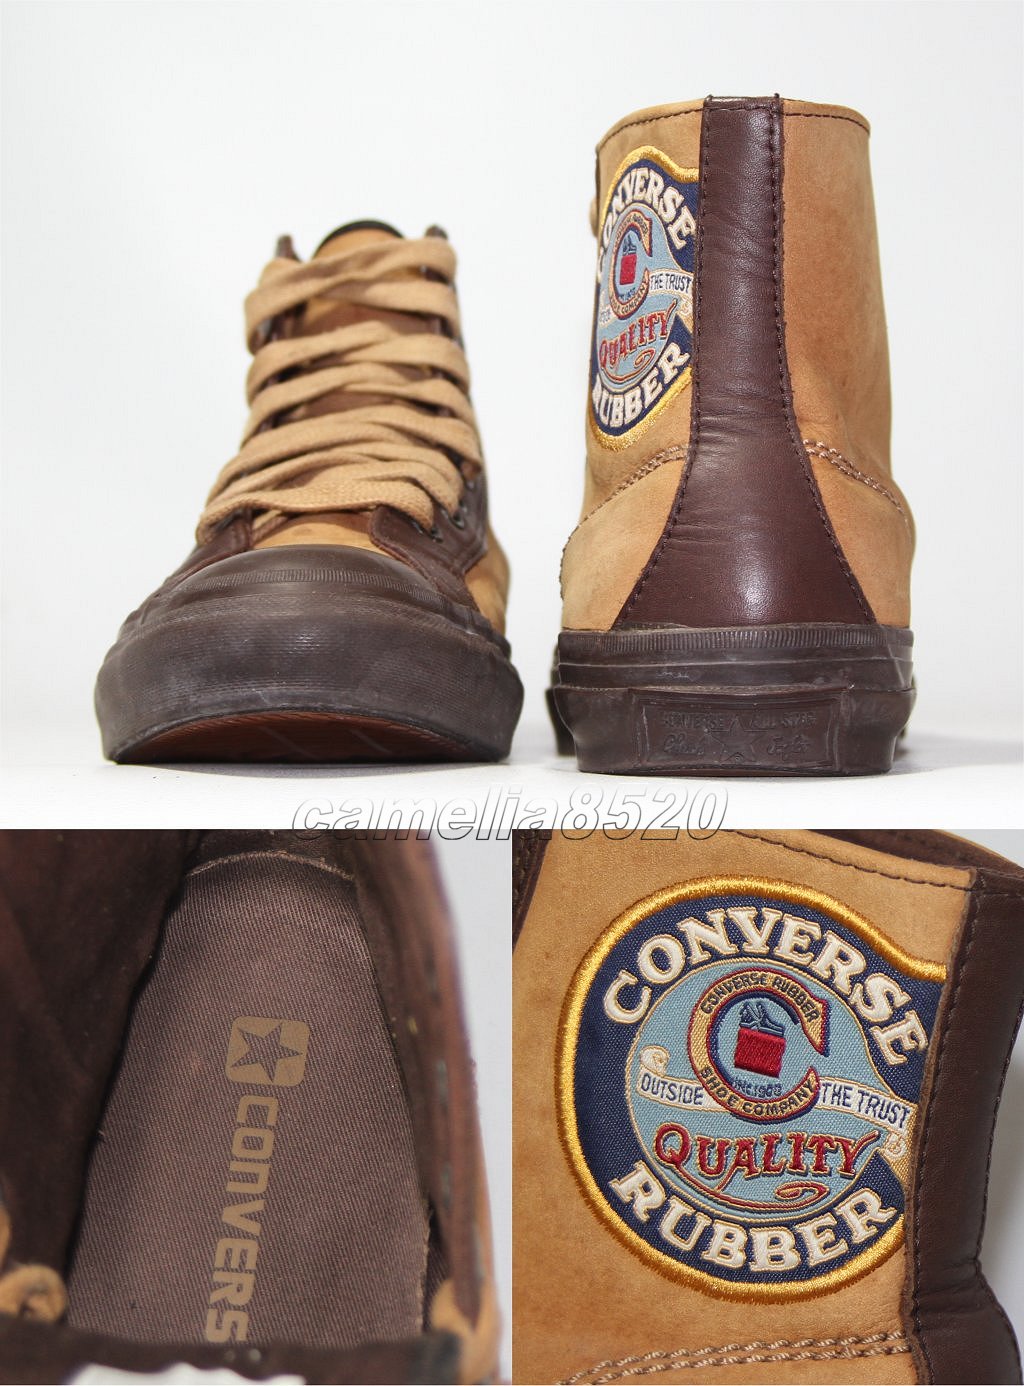 Converse zipper Taylor all Star Premium Vintage 1908 HI leather ox is  ikatto 1J868 Brown / wheat color US5.5 24.5cm used beautiful goods : Real  Yahoo auction salling